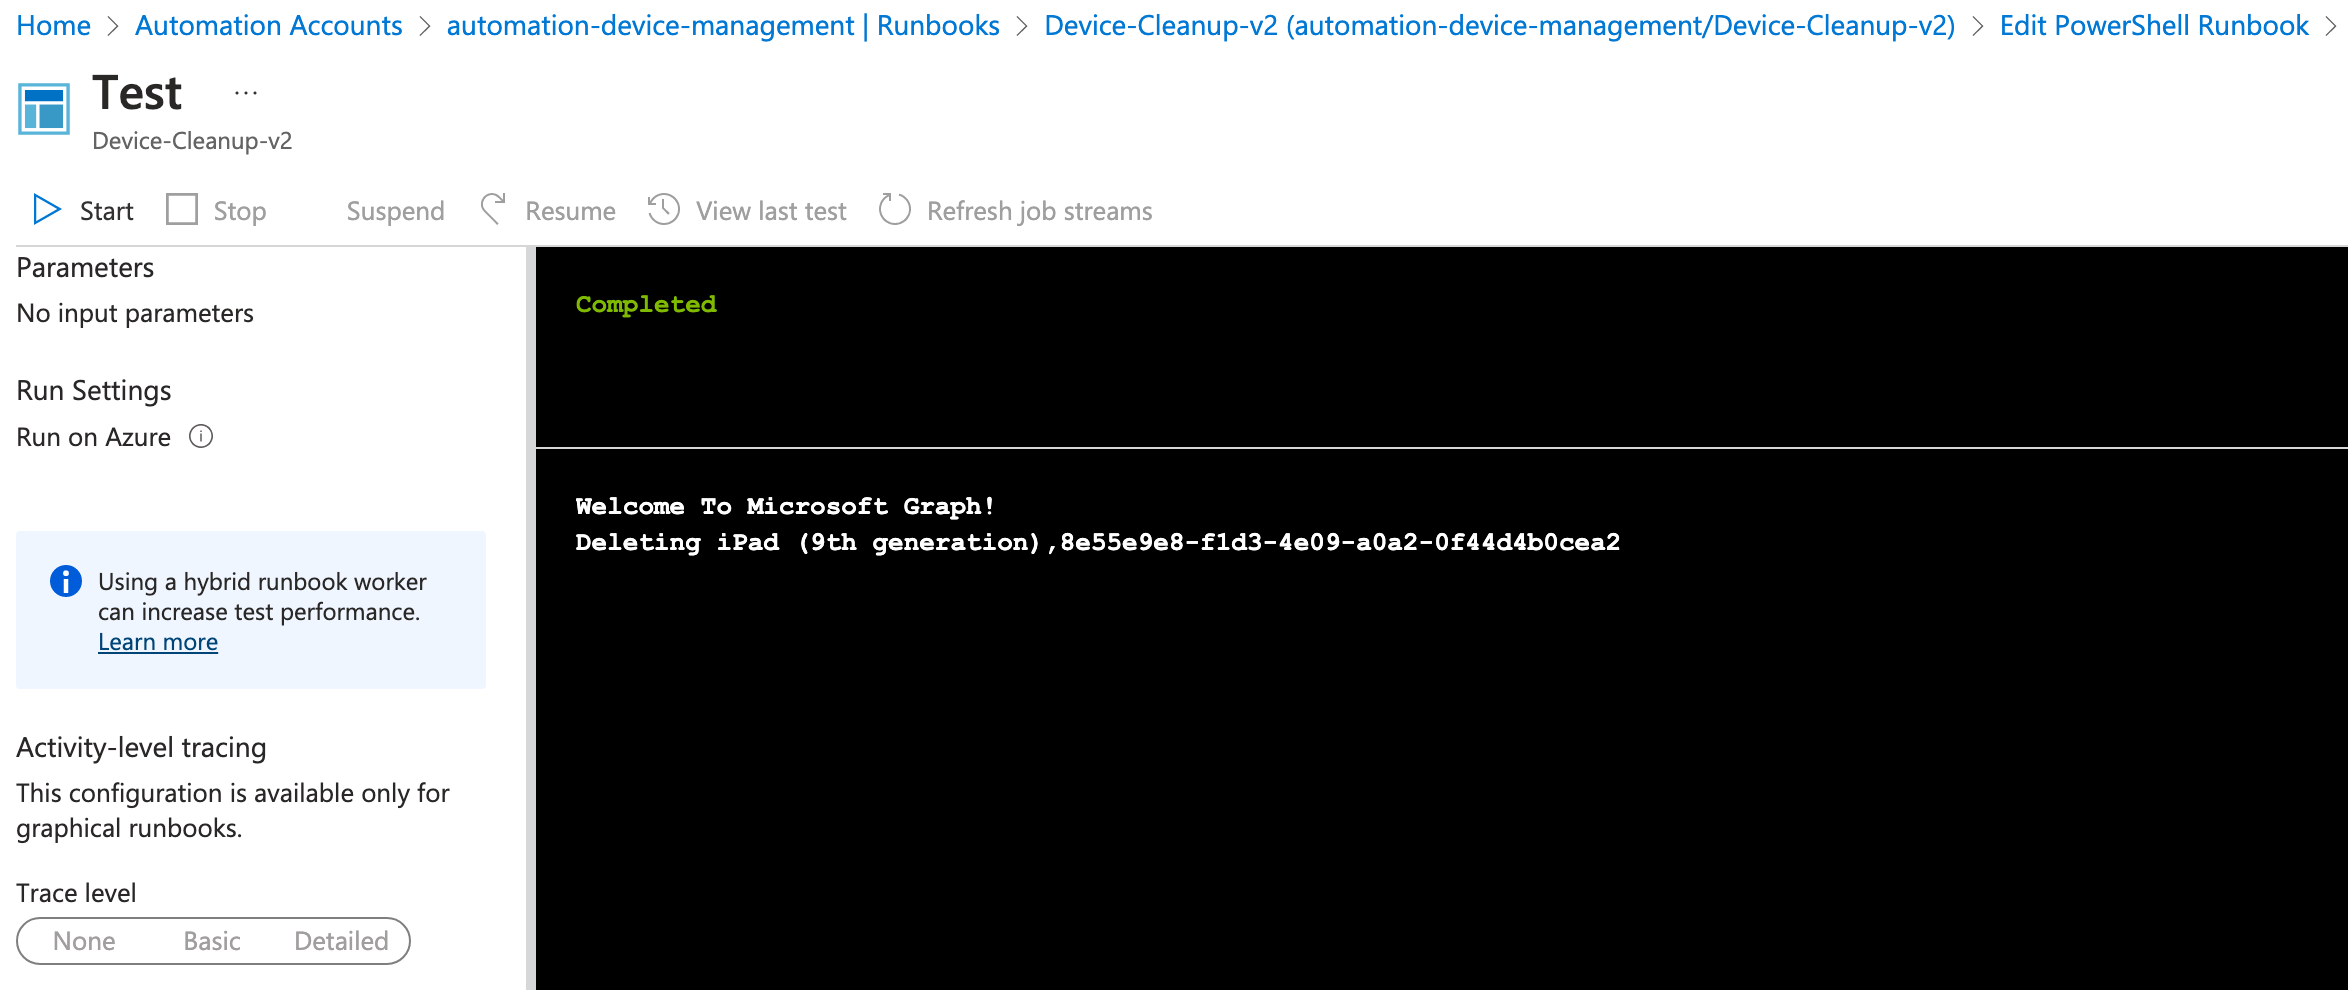 Azure Automation - Device Cleanup v2